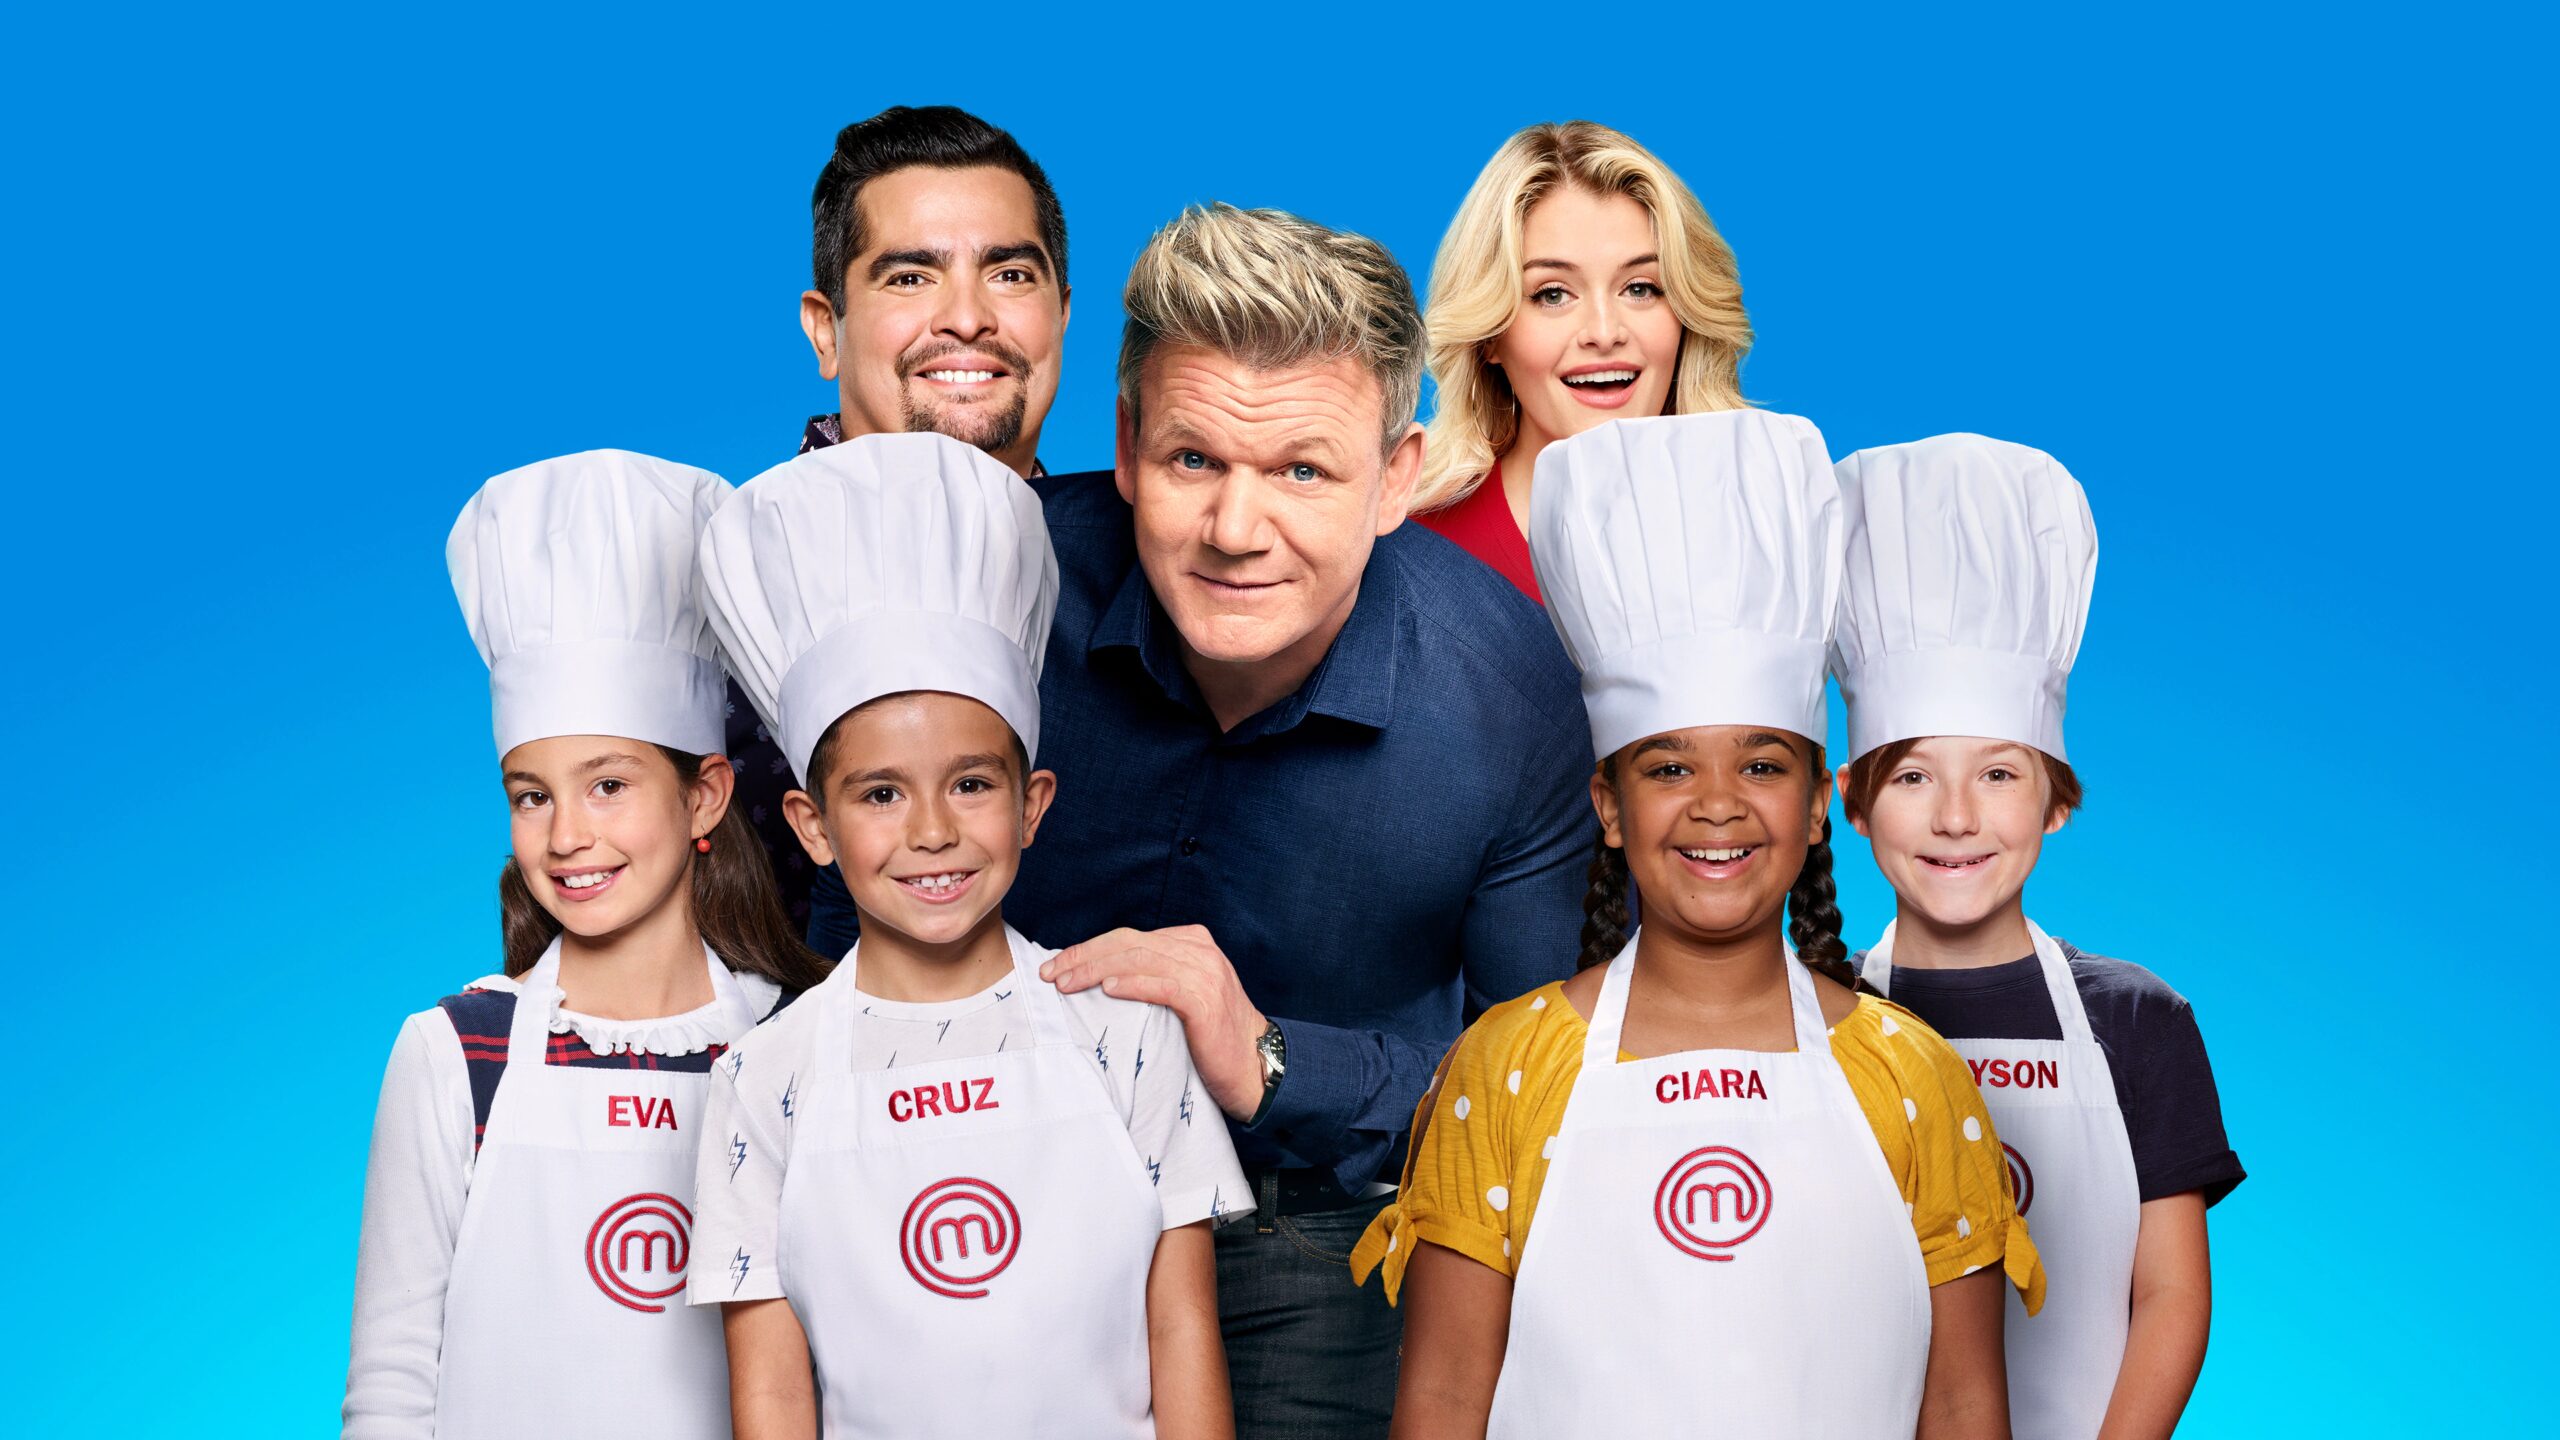 FOX Renews America's Cutest Cooking Competition Series, "MasterChef Junior" for a Ninth Season